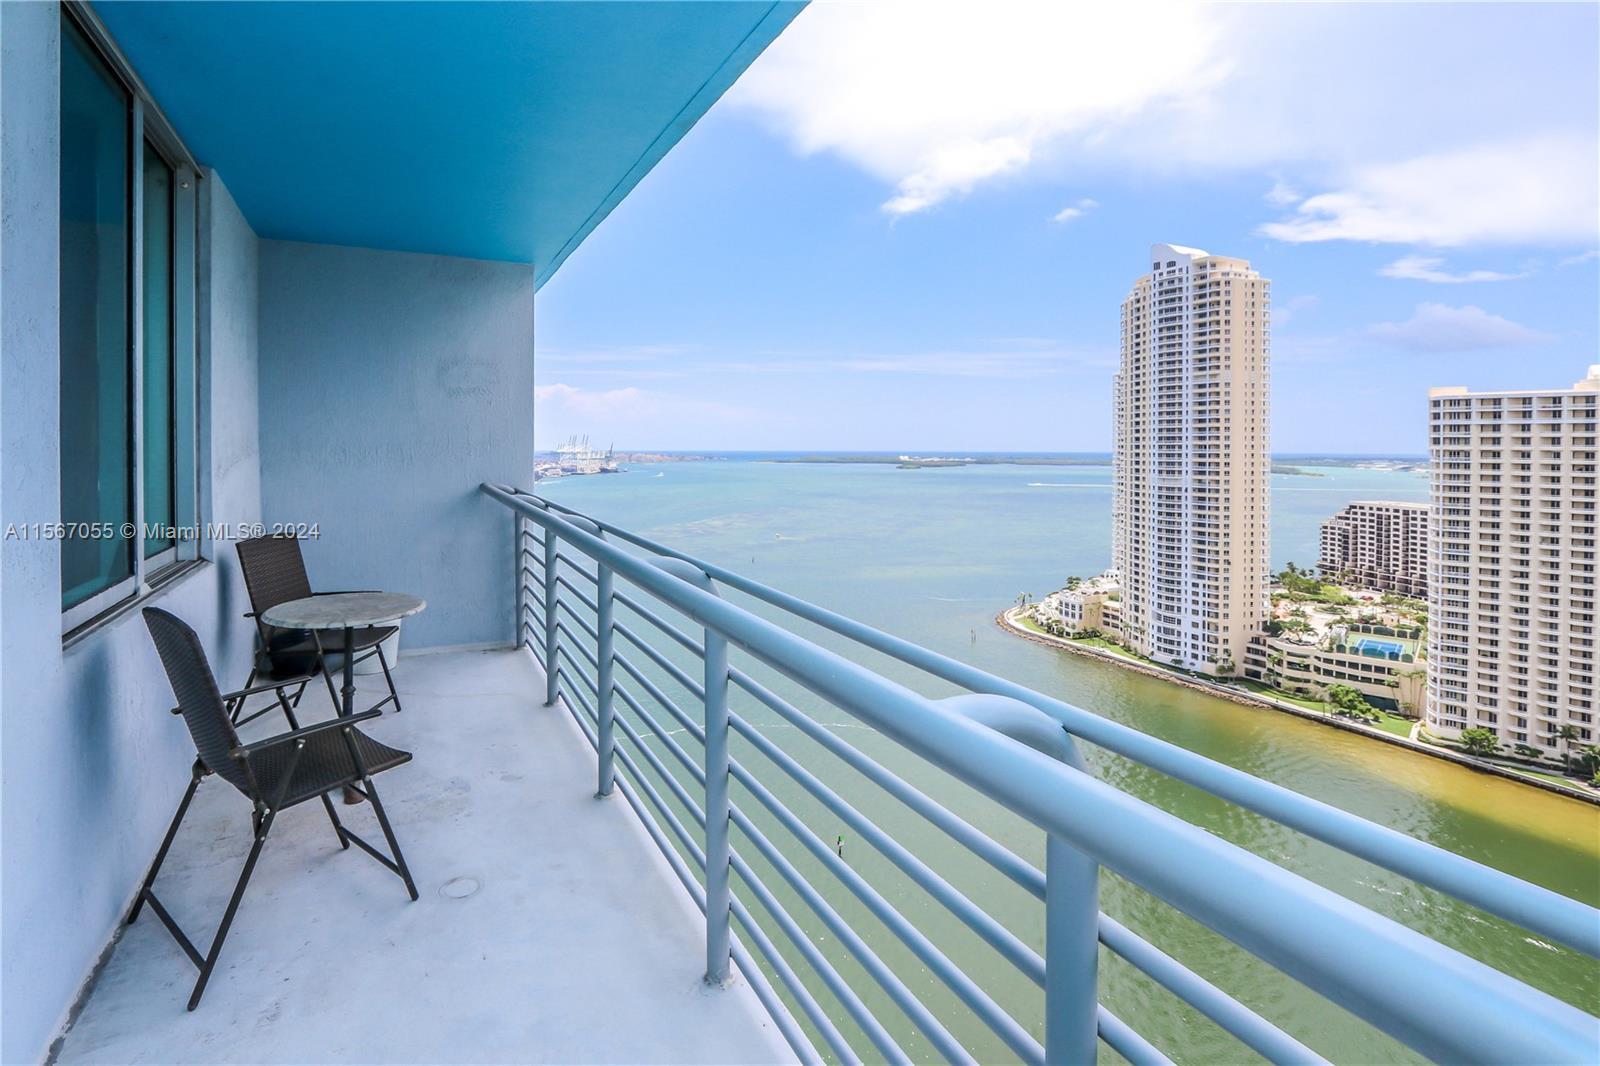 Beautiful 1 bedroom 1 bath condo nicely furnished overlooking Biscayne Bay, Miami River, and Brickel